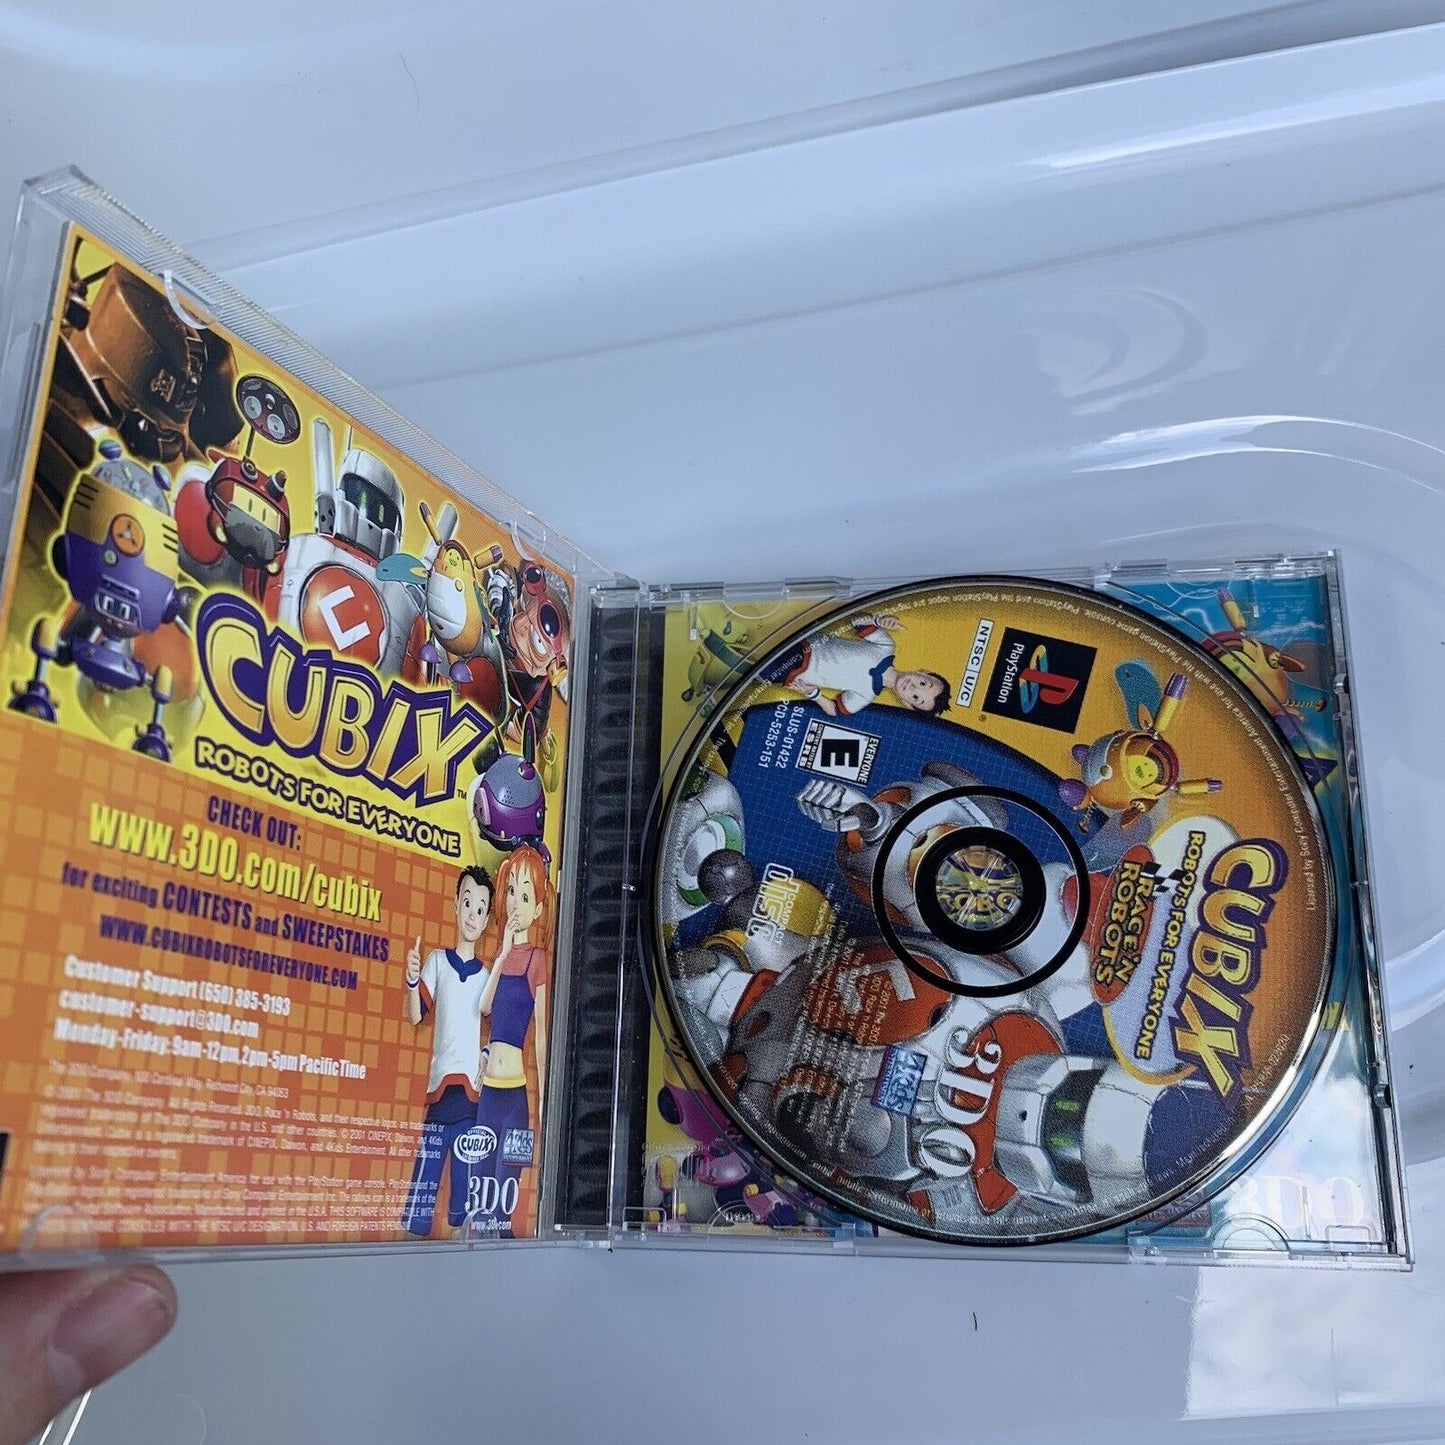 Cubix Robots For Everyone Playstation One PS1